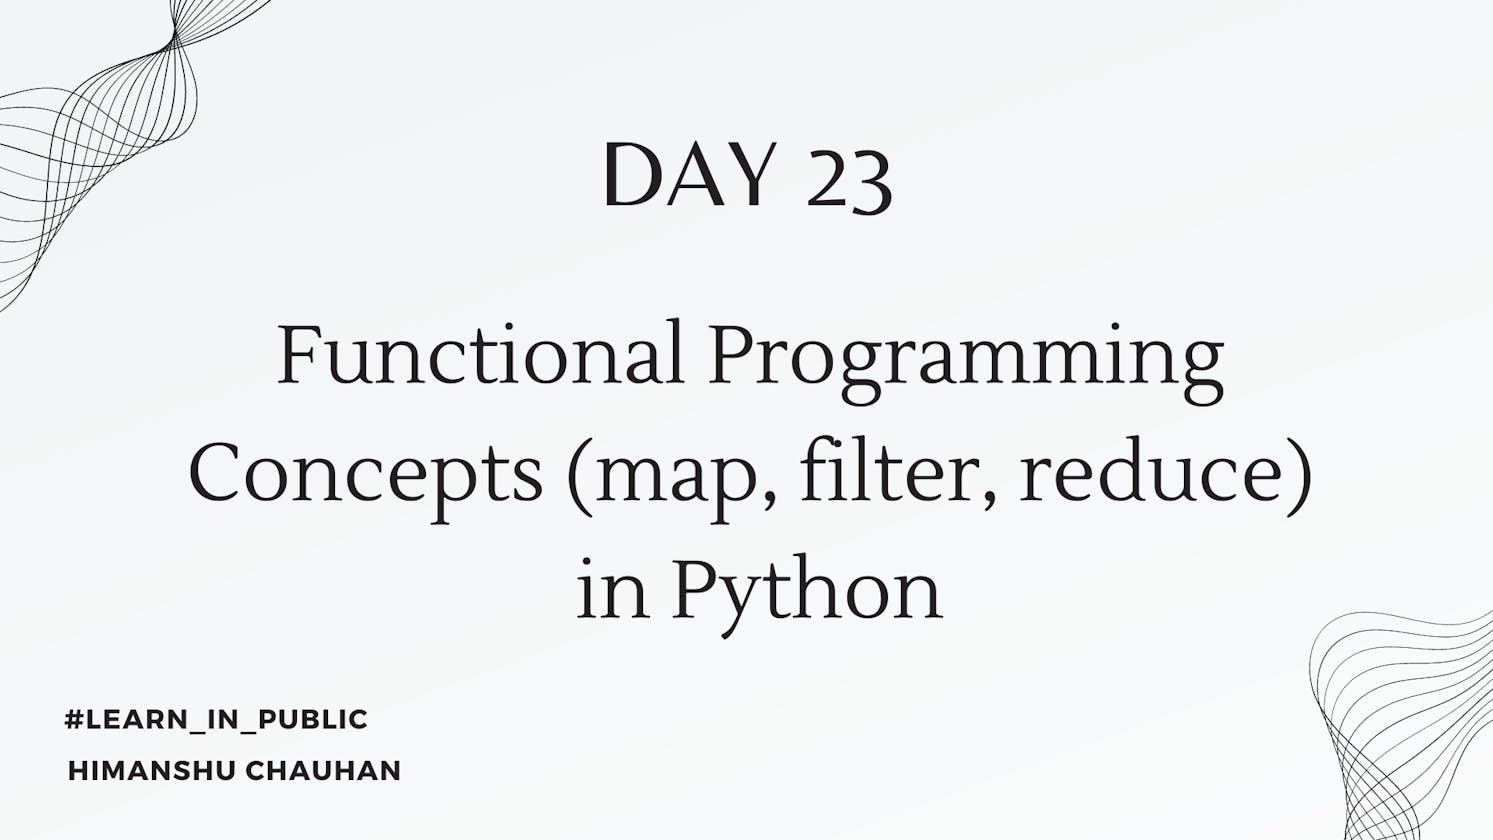 Day 23: Functional Programming Concepts (map, filter, reduce) in Python